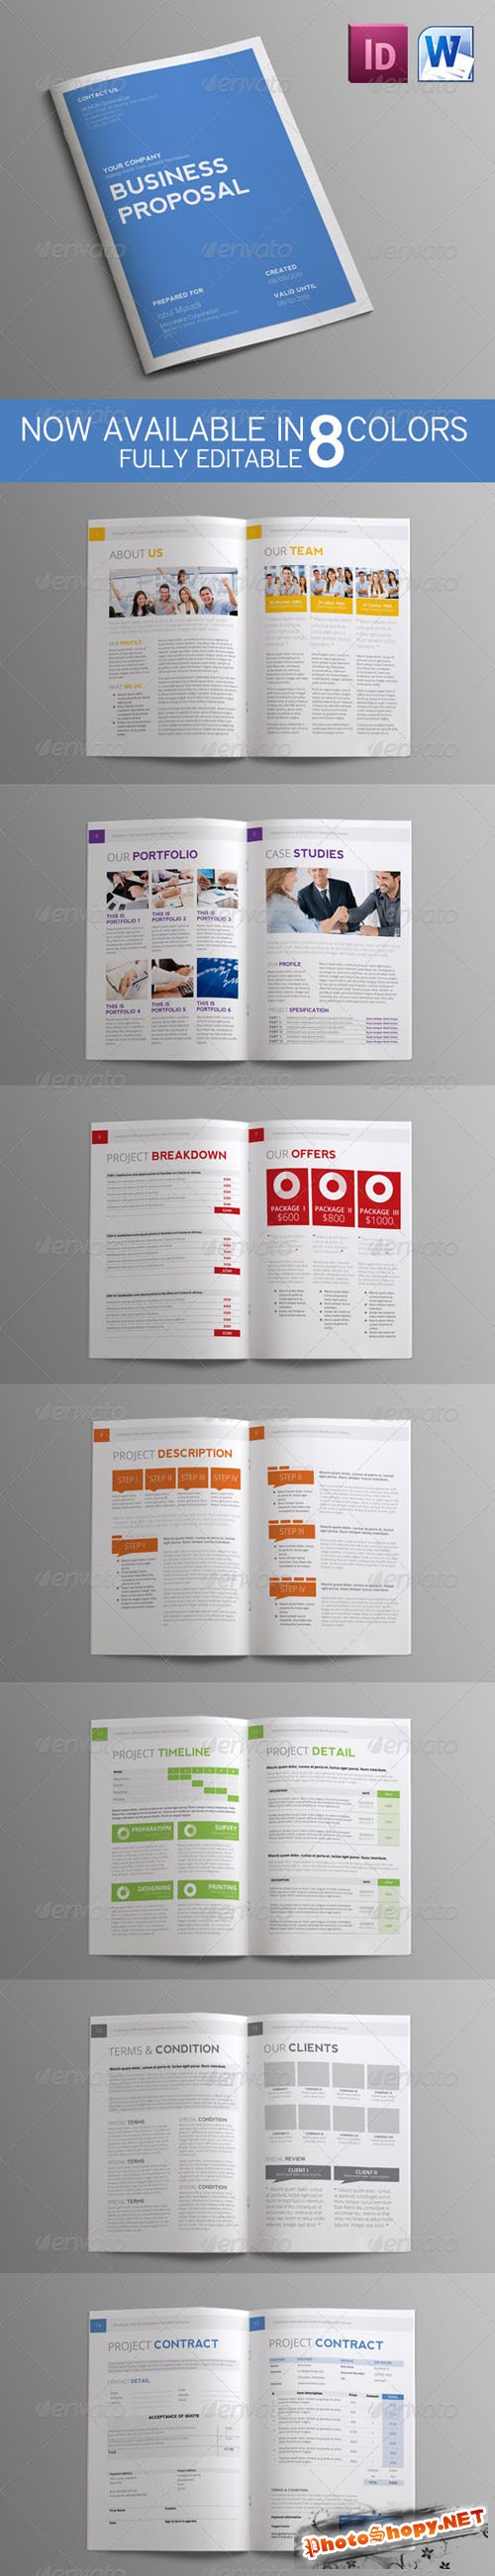 GraphicRiver - Sleman Clean Proposal Template 3776815